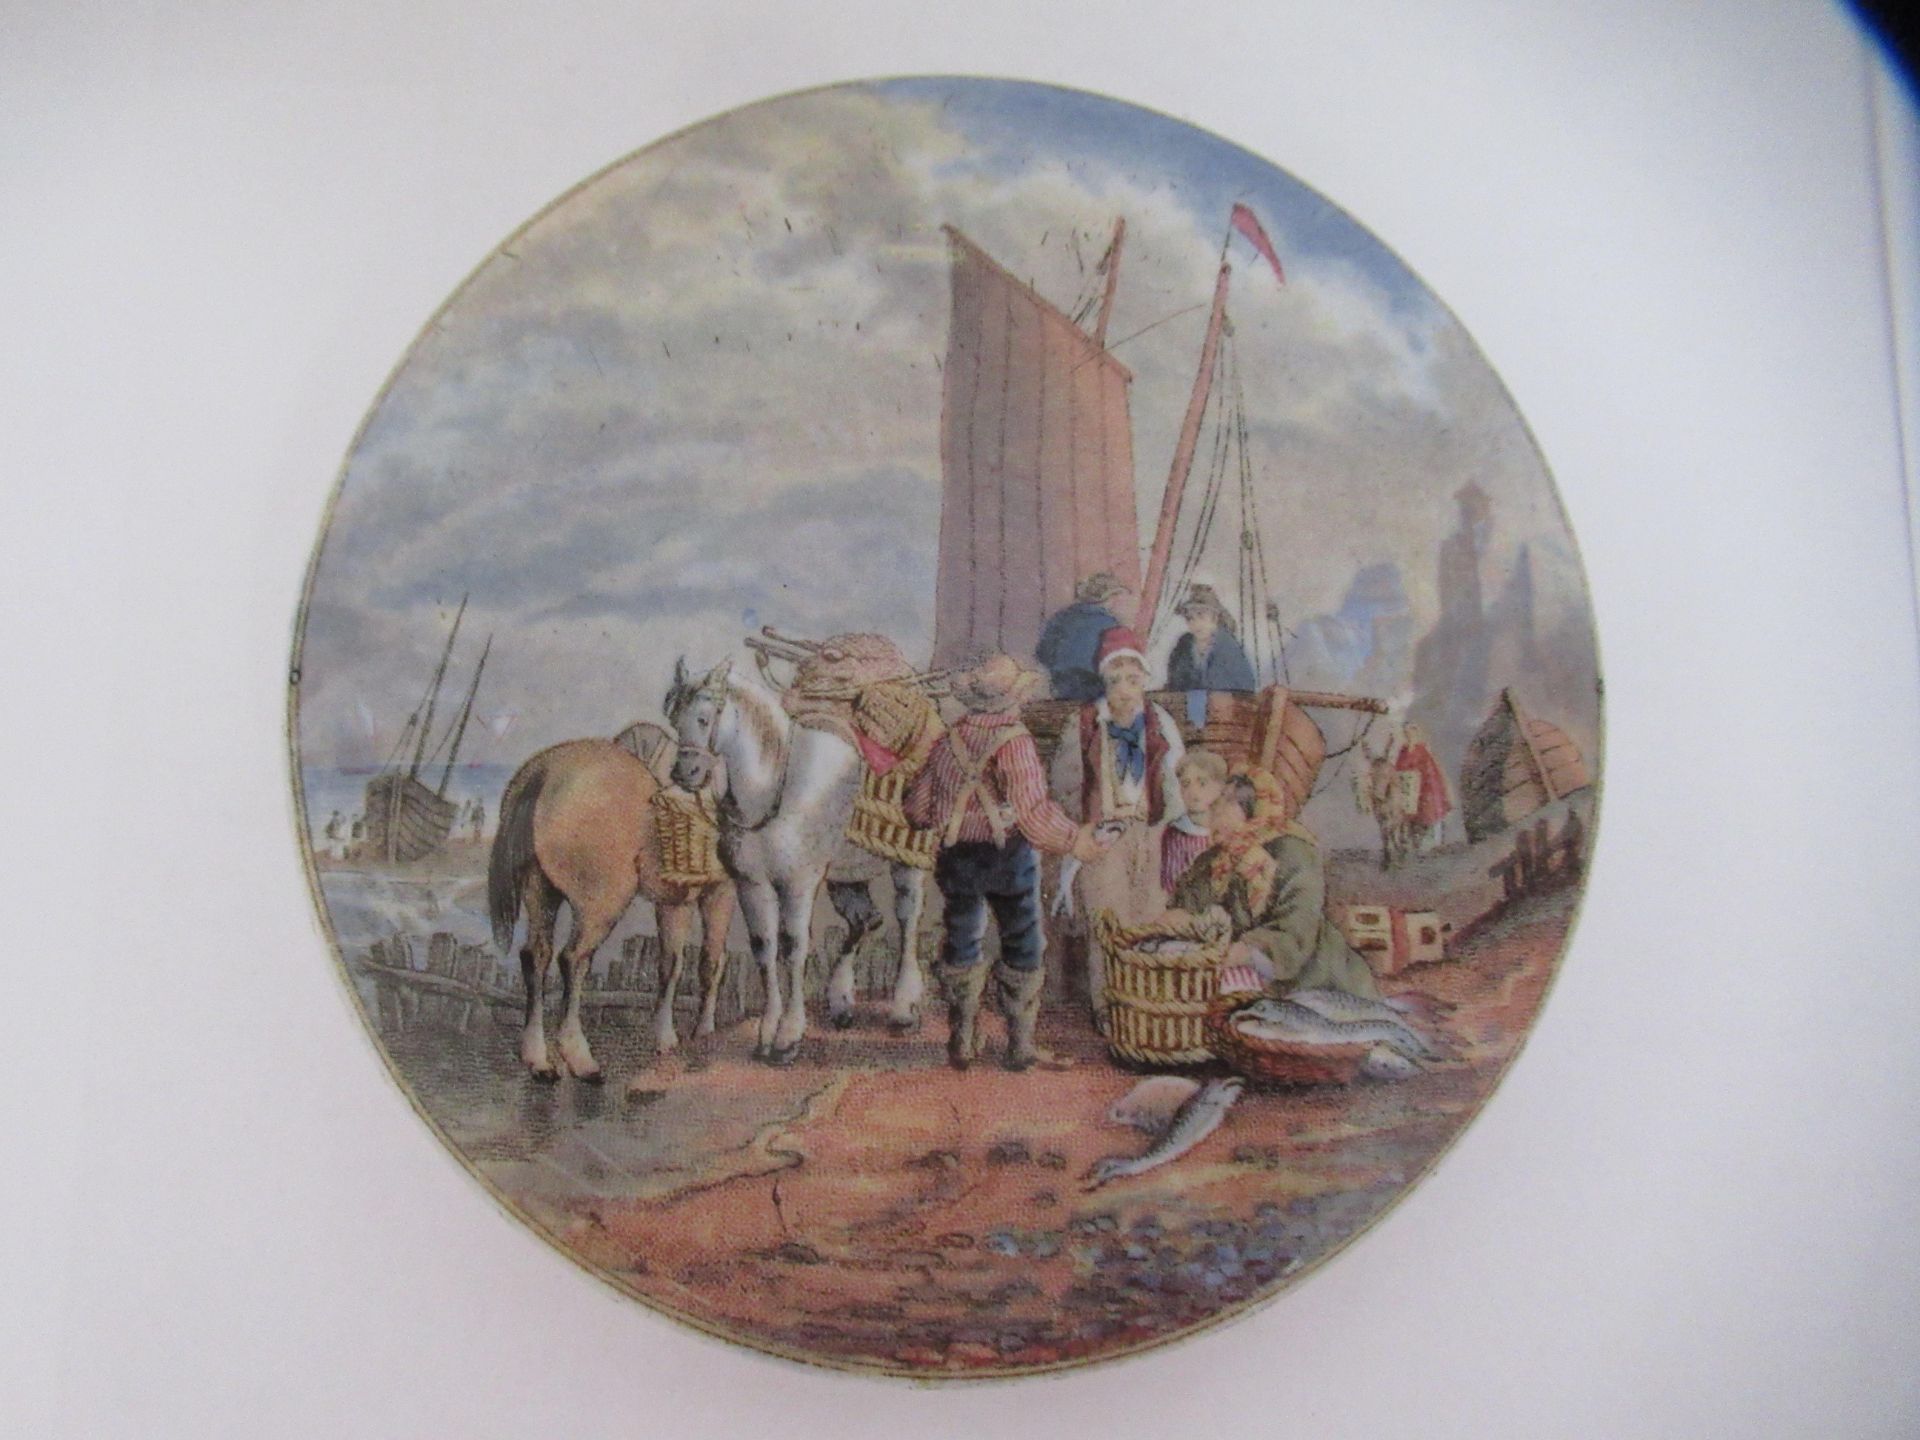 6x Prattware ceramic lids including 'Royal Harbour Ramsgate', 'Uncle Toby', and 'The Times' - Image 25 of 28